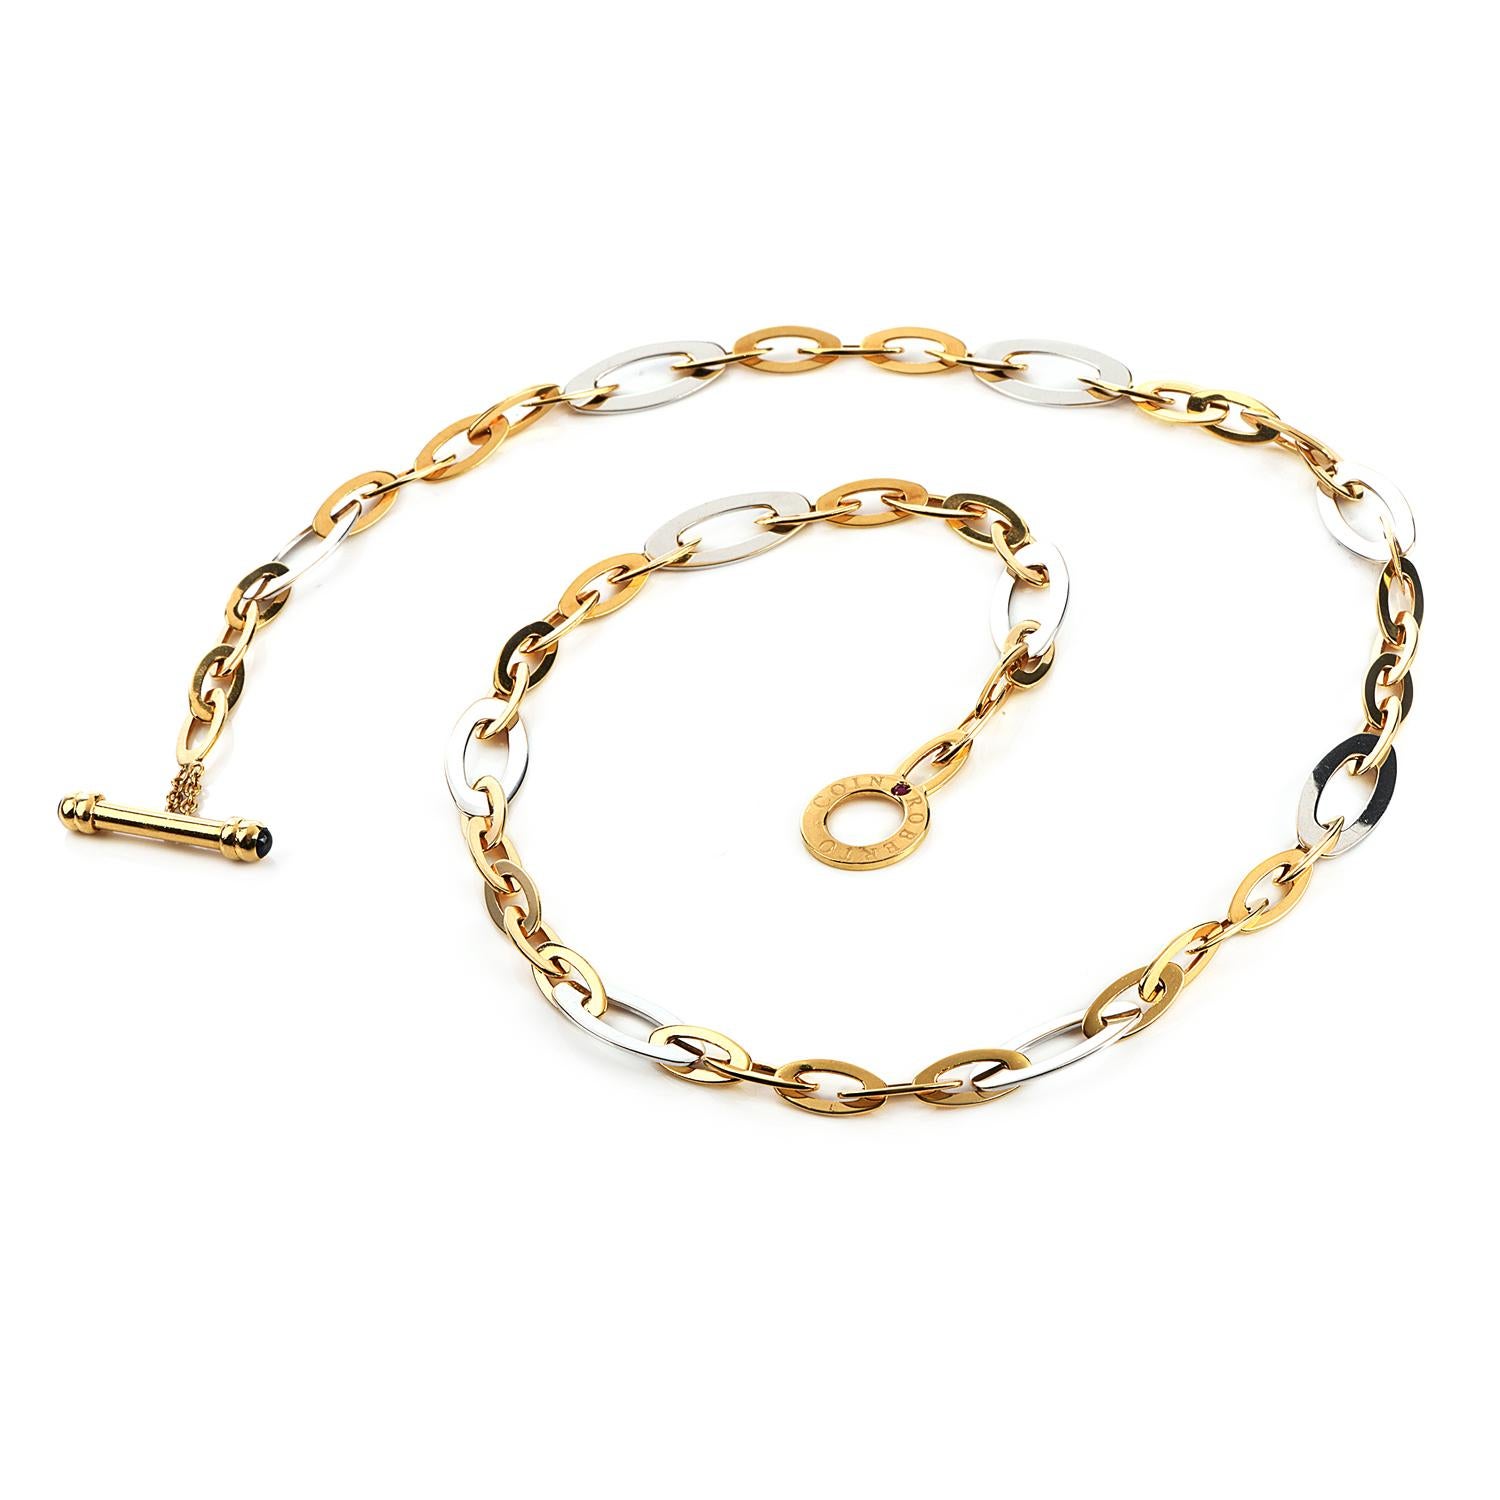 Presenting this 18K Yellow and white Gold Chic and Shine Chain Necklace by Roberto Coin.  Roberto Coin is the creator of sophistication, blending modernity and tradition; every single design is created with absolute freedom to magnify beauty and